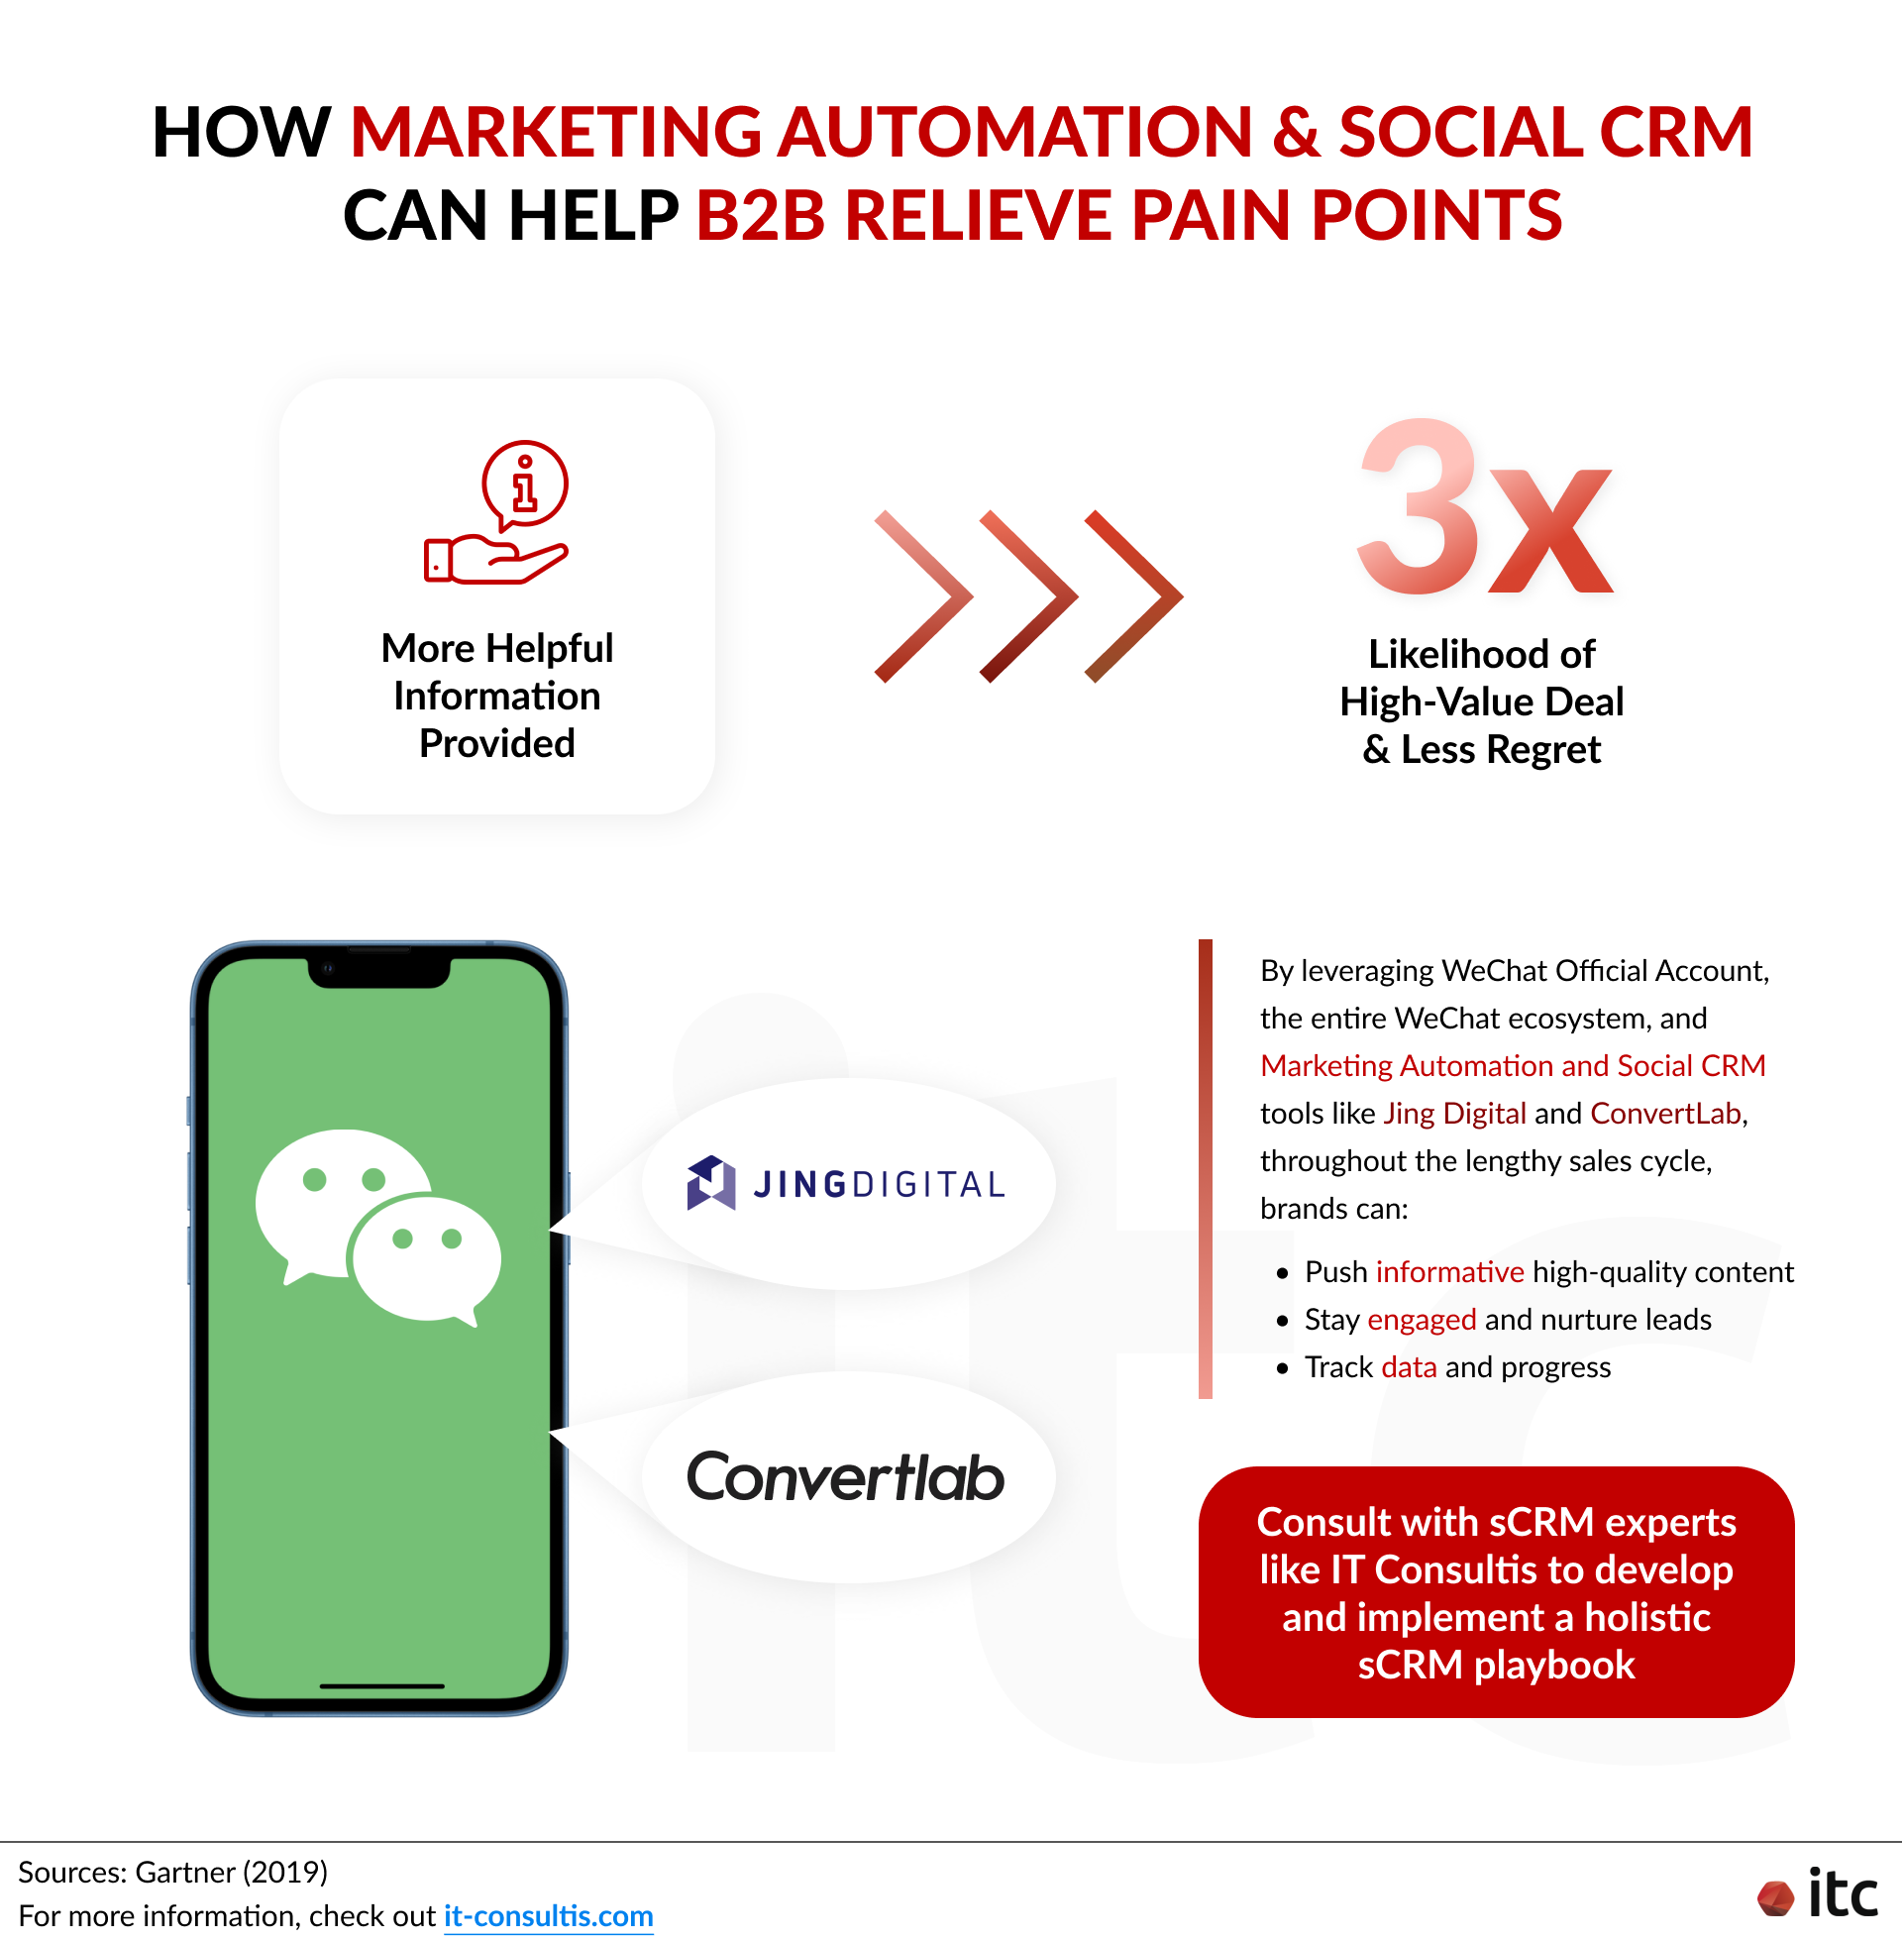 Marketing automation & sCRM can help B2B businesses provide more useful information to clients, which can boost the likelihood of gaining a high-value deal with less regret by 3 times